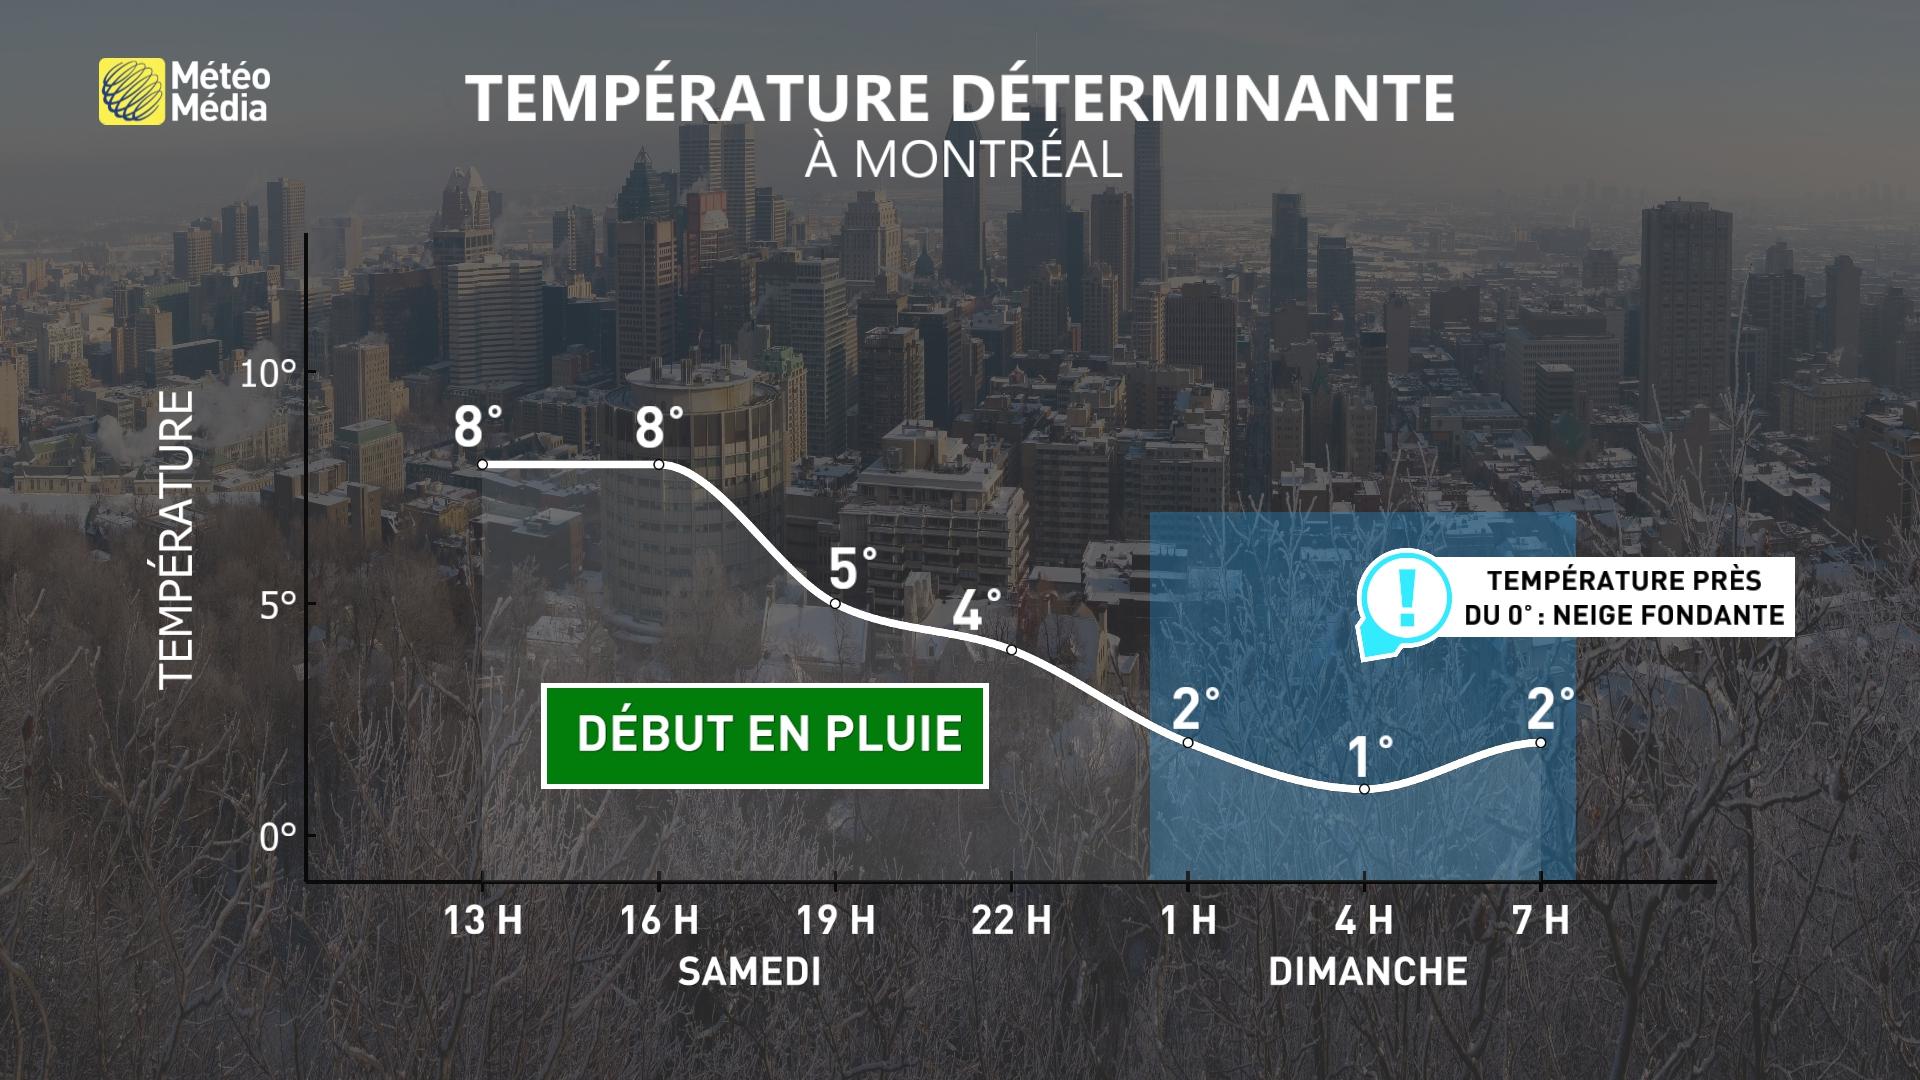 Quebec Weather Forecast: Huge System to Hit the Province - Rain, Snow, and Uncertainty Ahead - Archyde